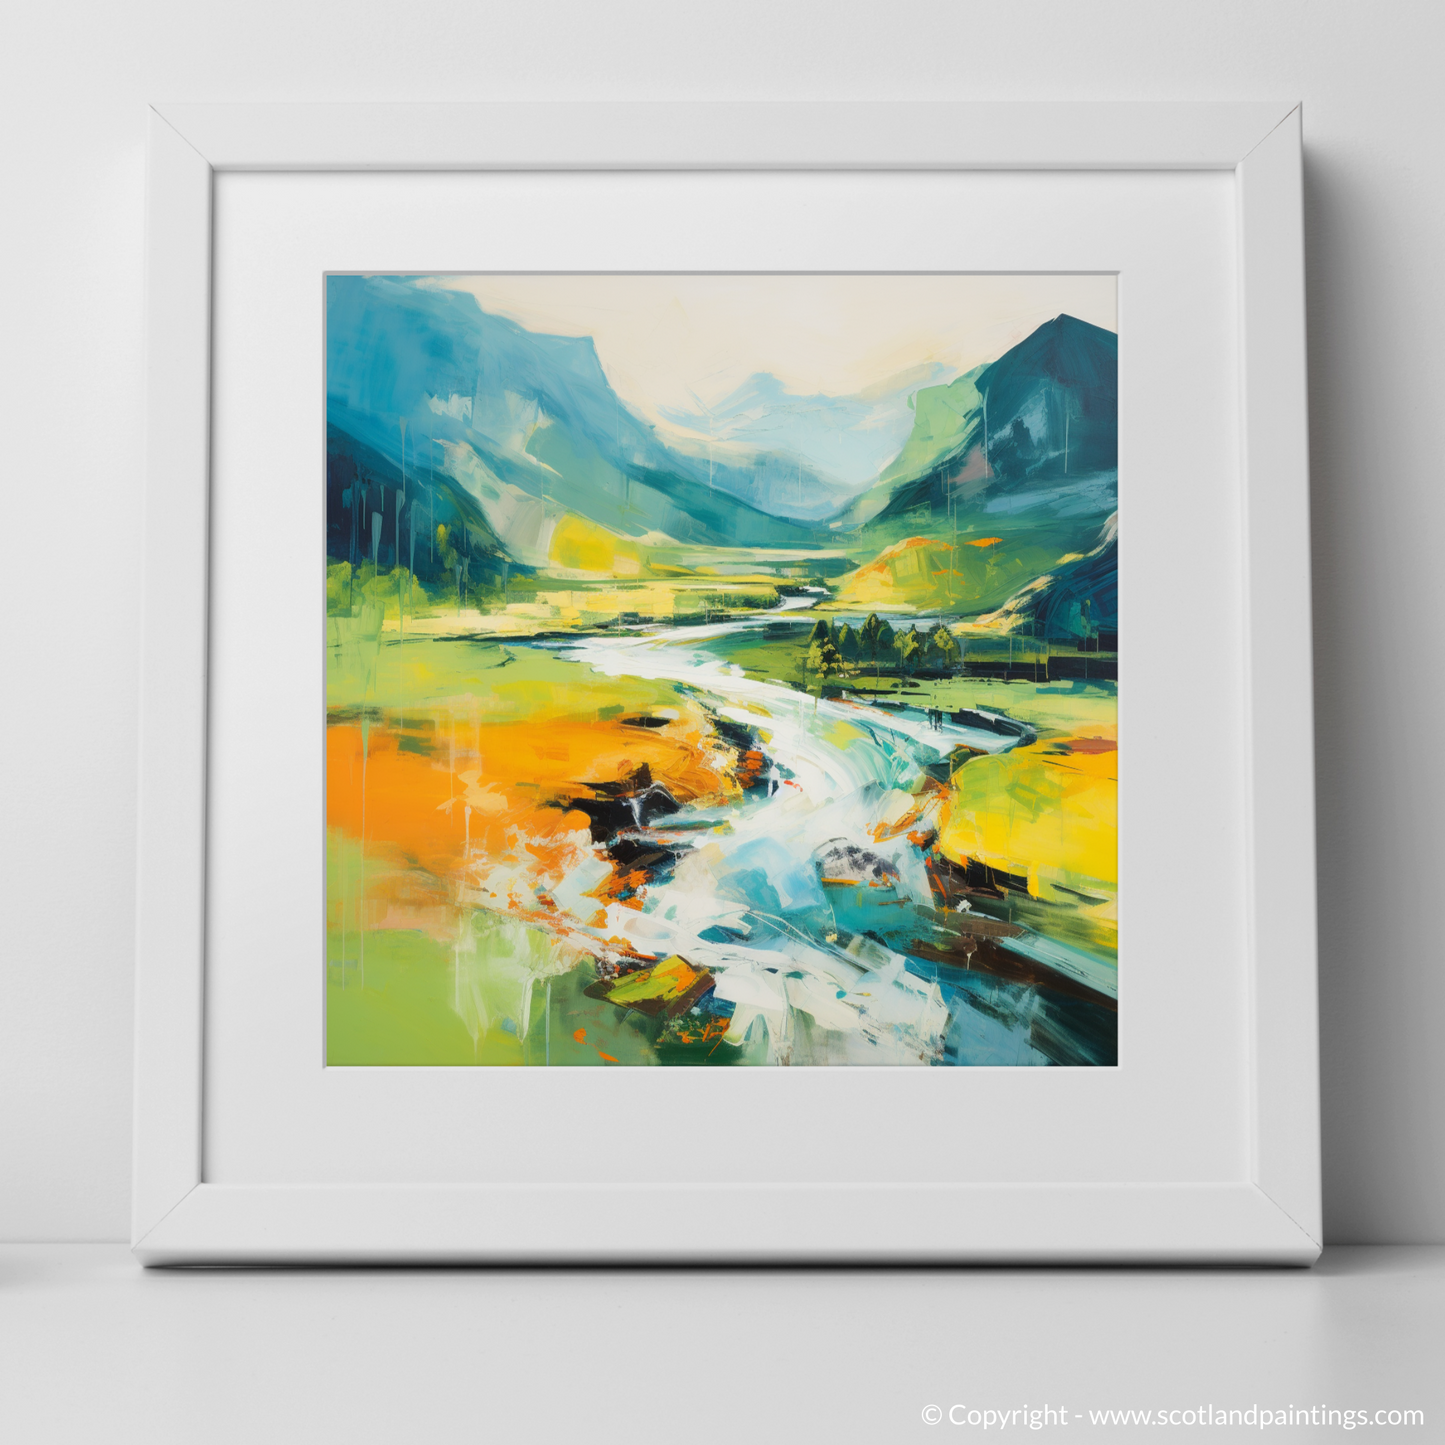 Art Print of River Garry, Highlands in summer with a white frame